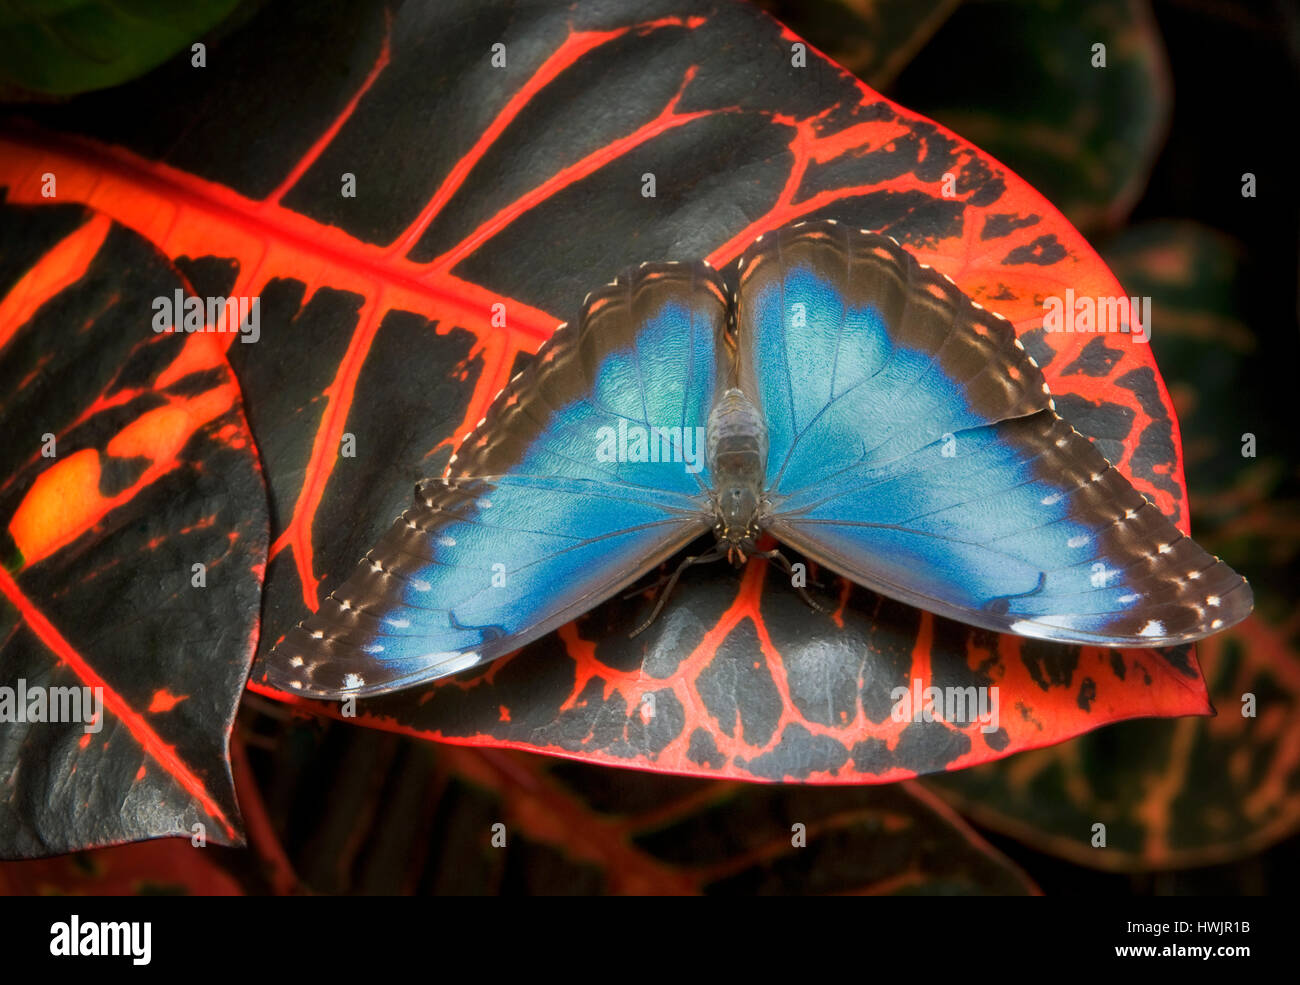 Comon Morpho butterfly (Morpho peleldes). Victoria Butterfly Gardens, Victoria, B.C. Canada Stock Photo